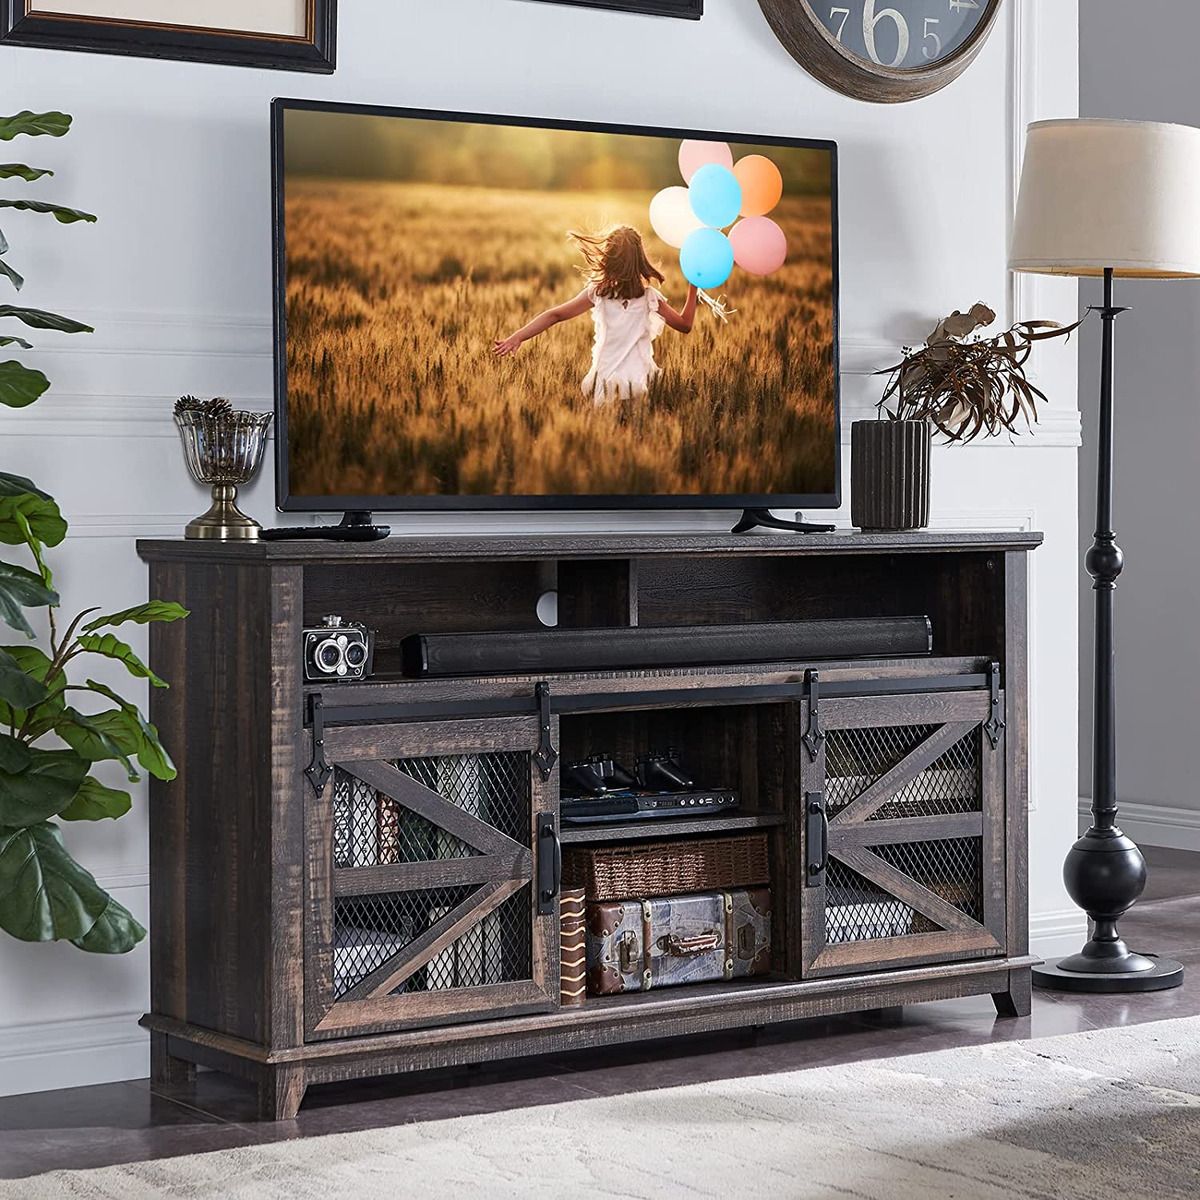 Farmhouse Tv Stand For 65+ Inch Tv, Industrial & Farmhouse Media  Entertainment C | Ebay With Regard To Farmhouse Media Entertainment Centers (View 2 of 15)